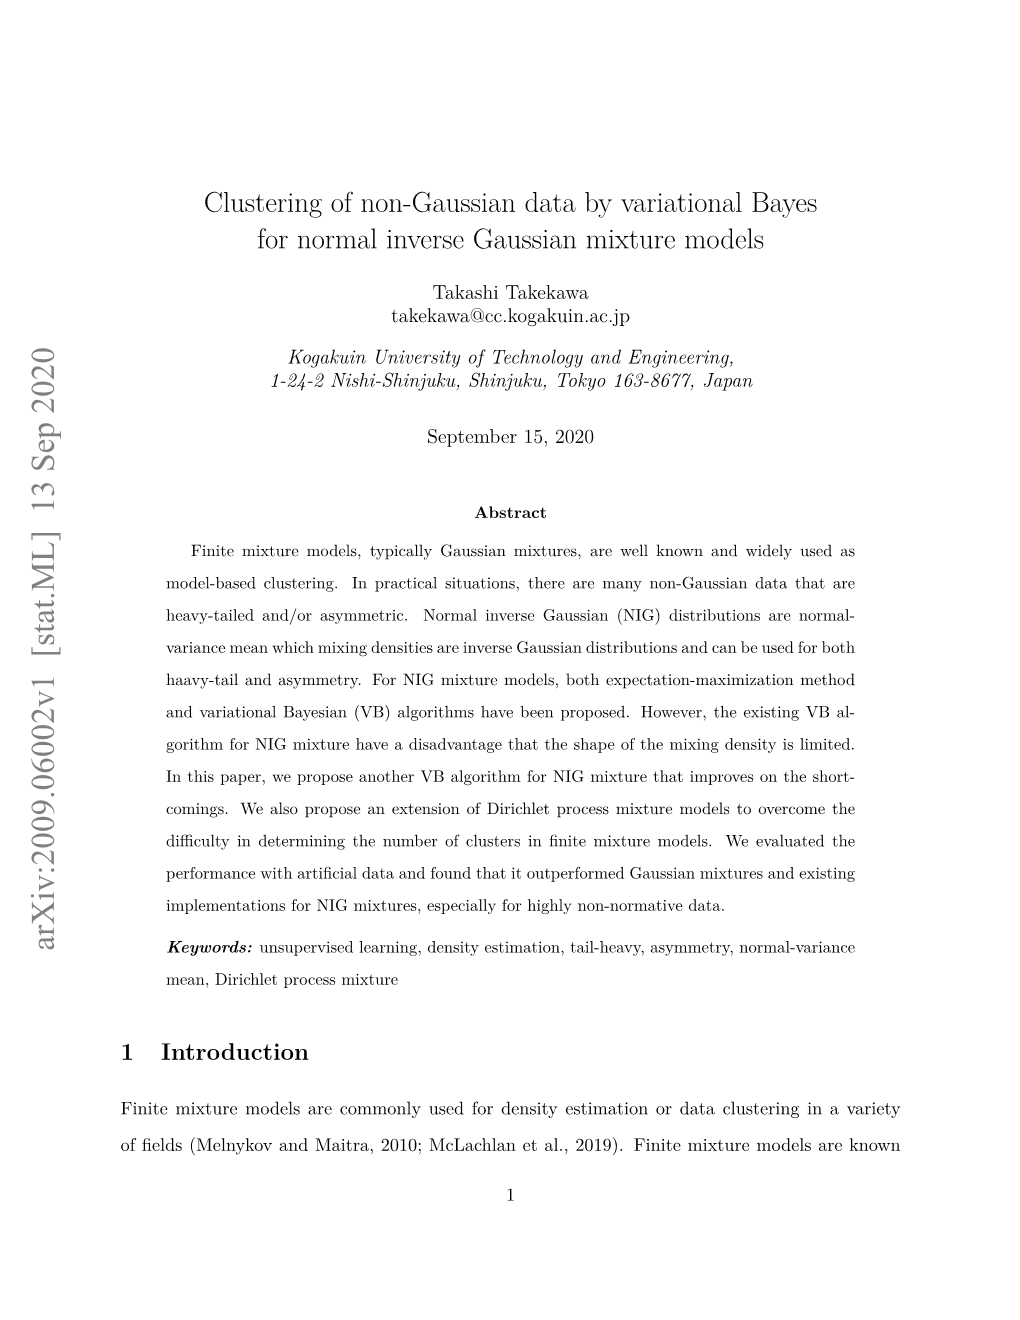 Clustering of Non-Gaussian Data by Variational Bayes for Normal Inverse Gaussian Mixture Models